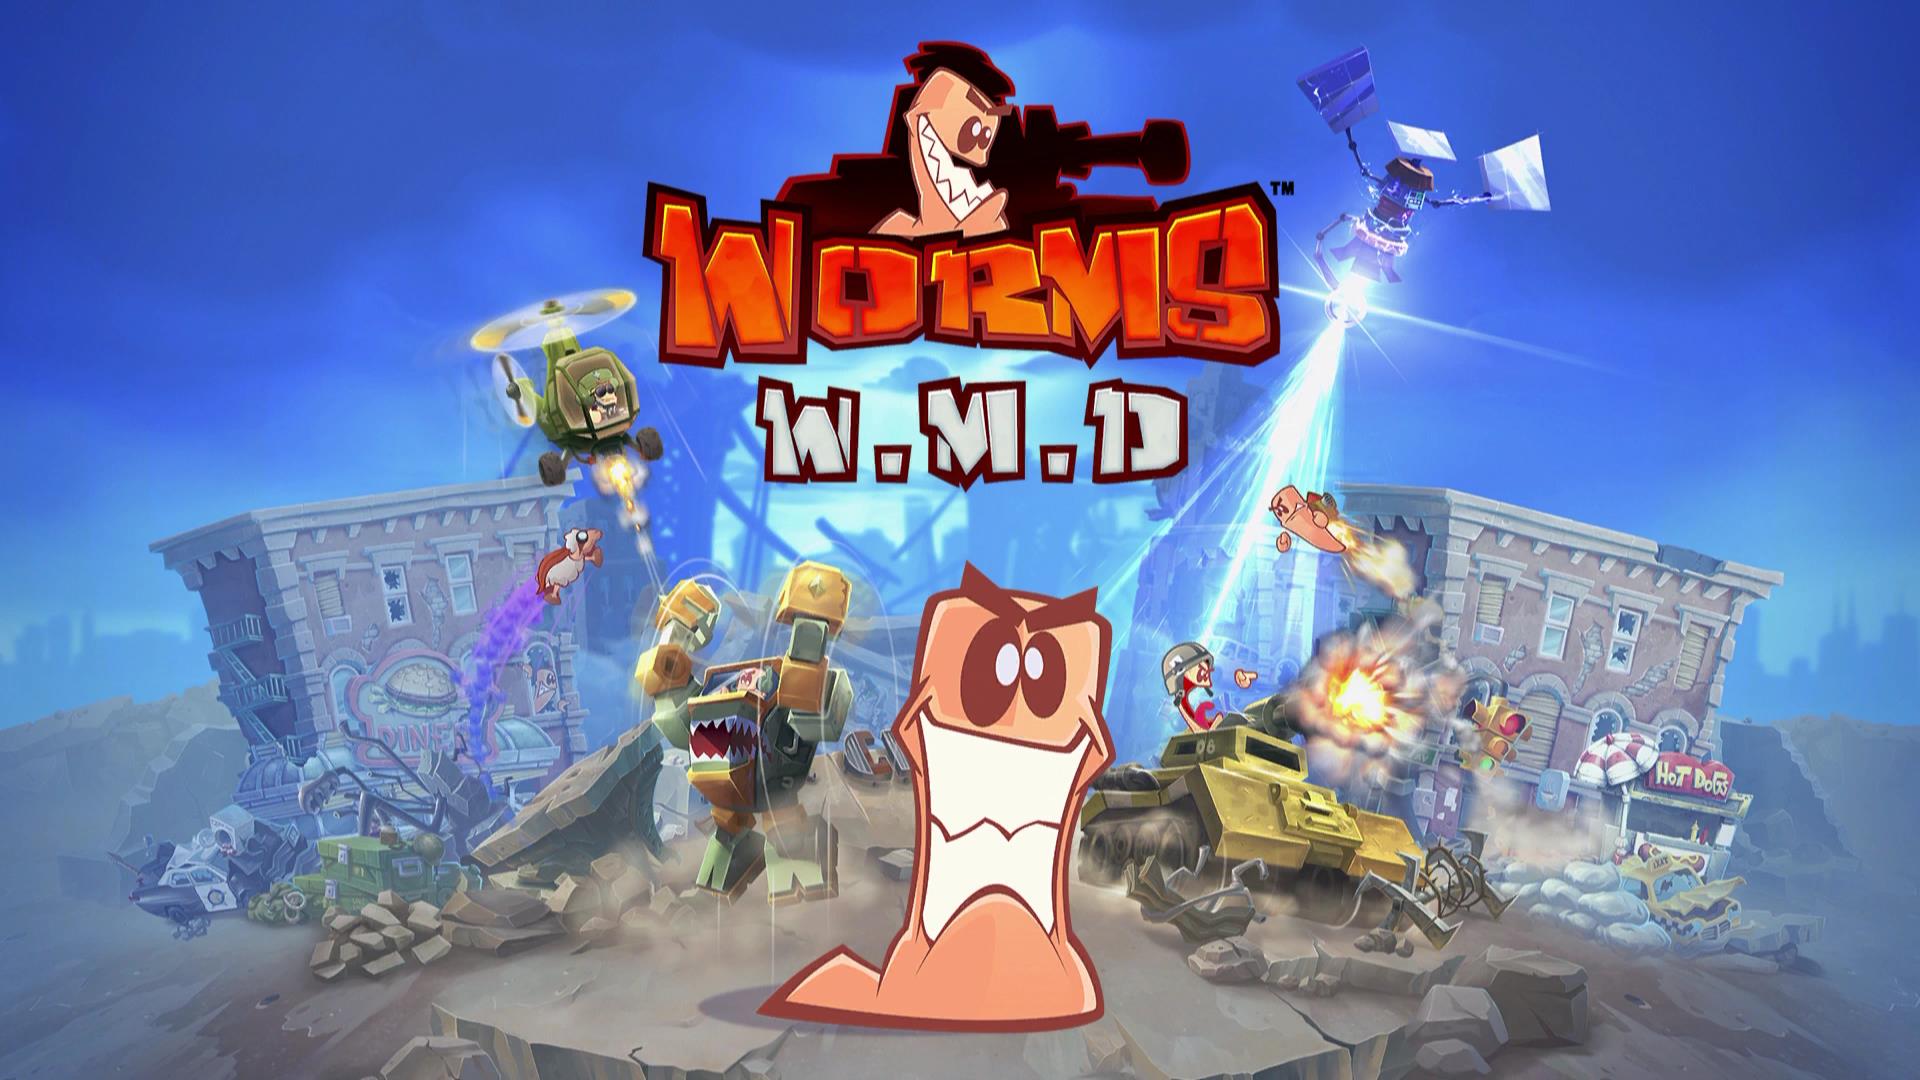 Worms wmd free download